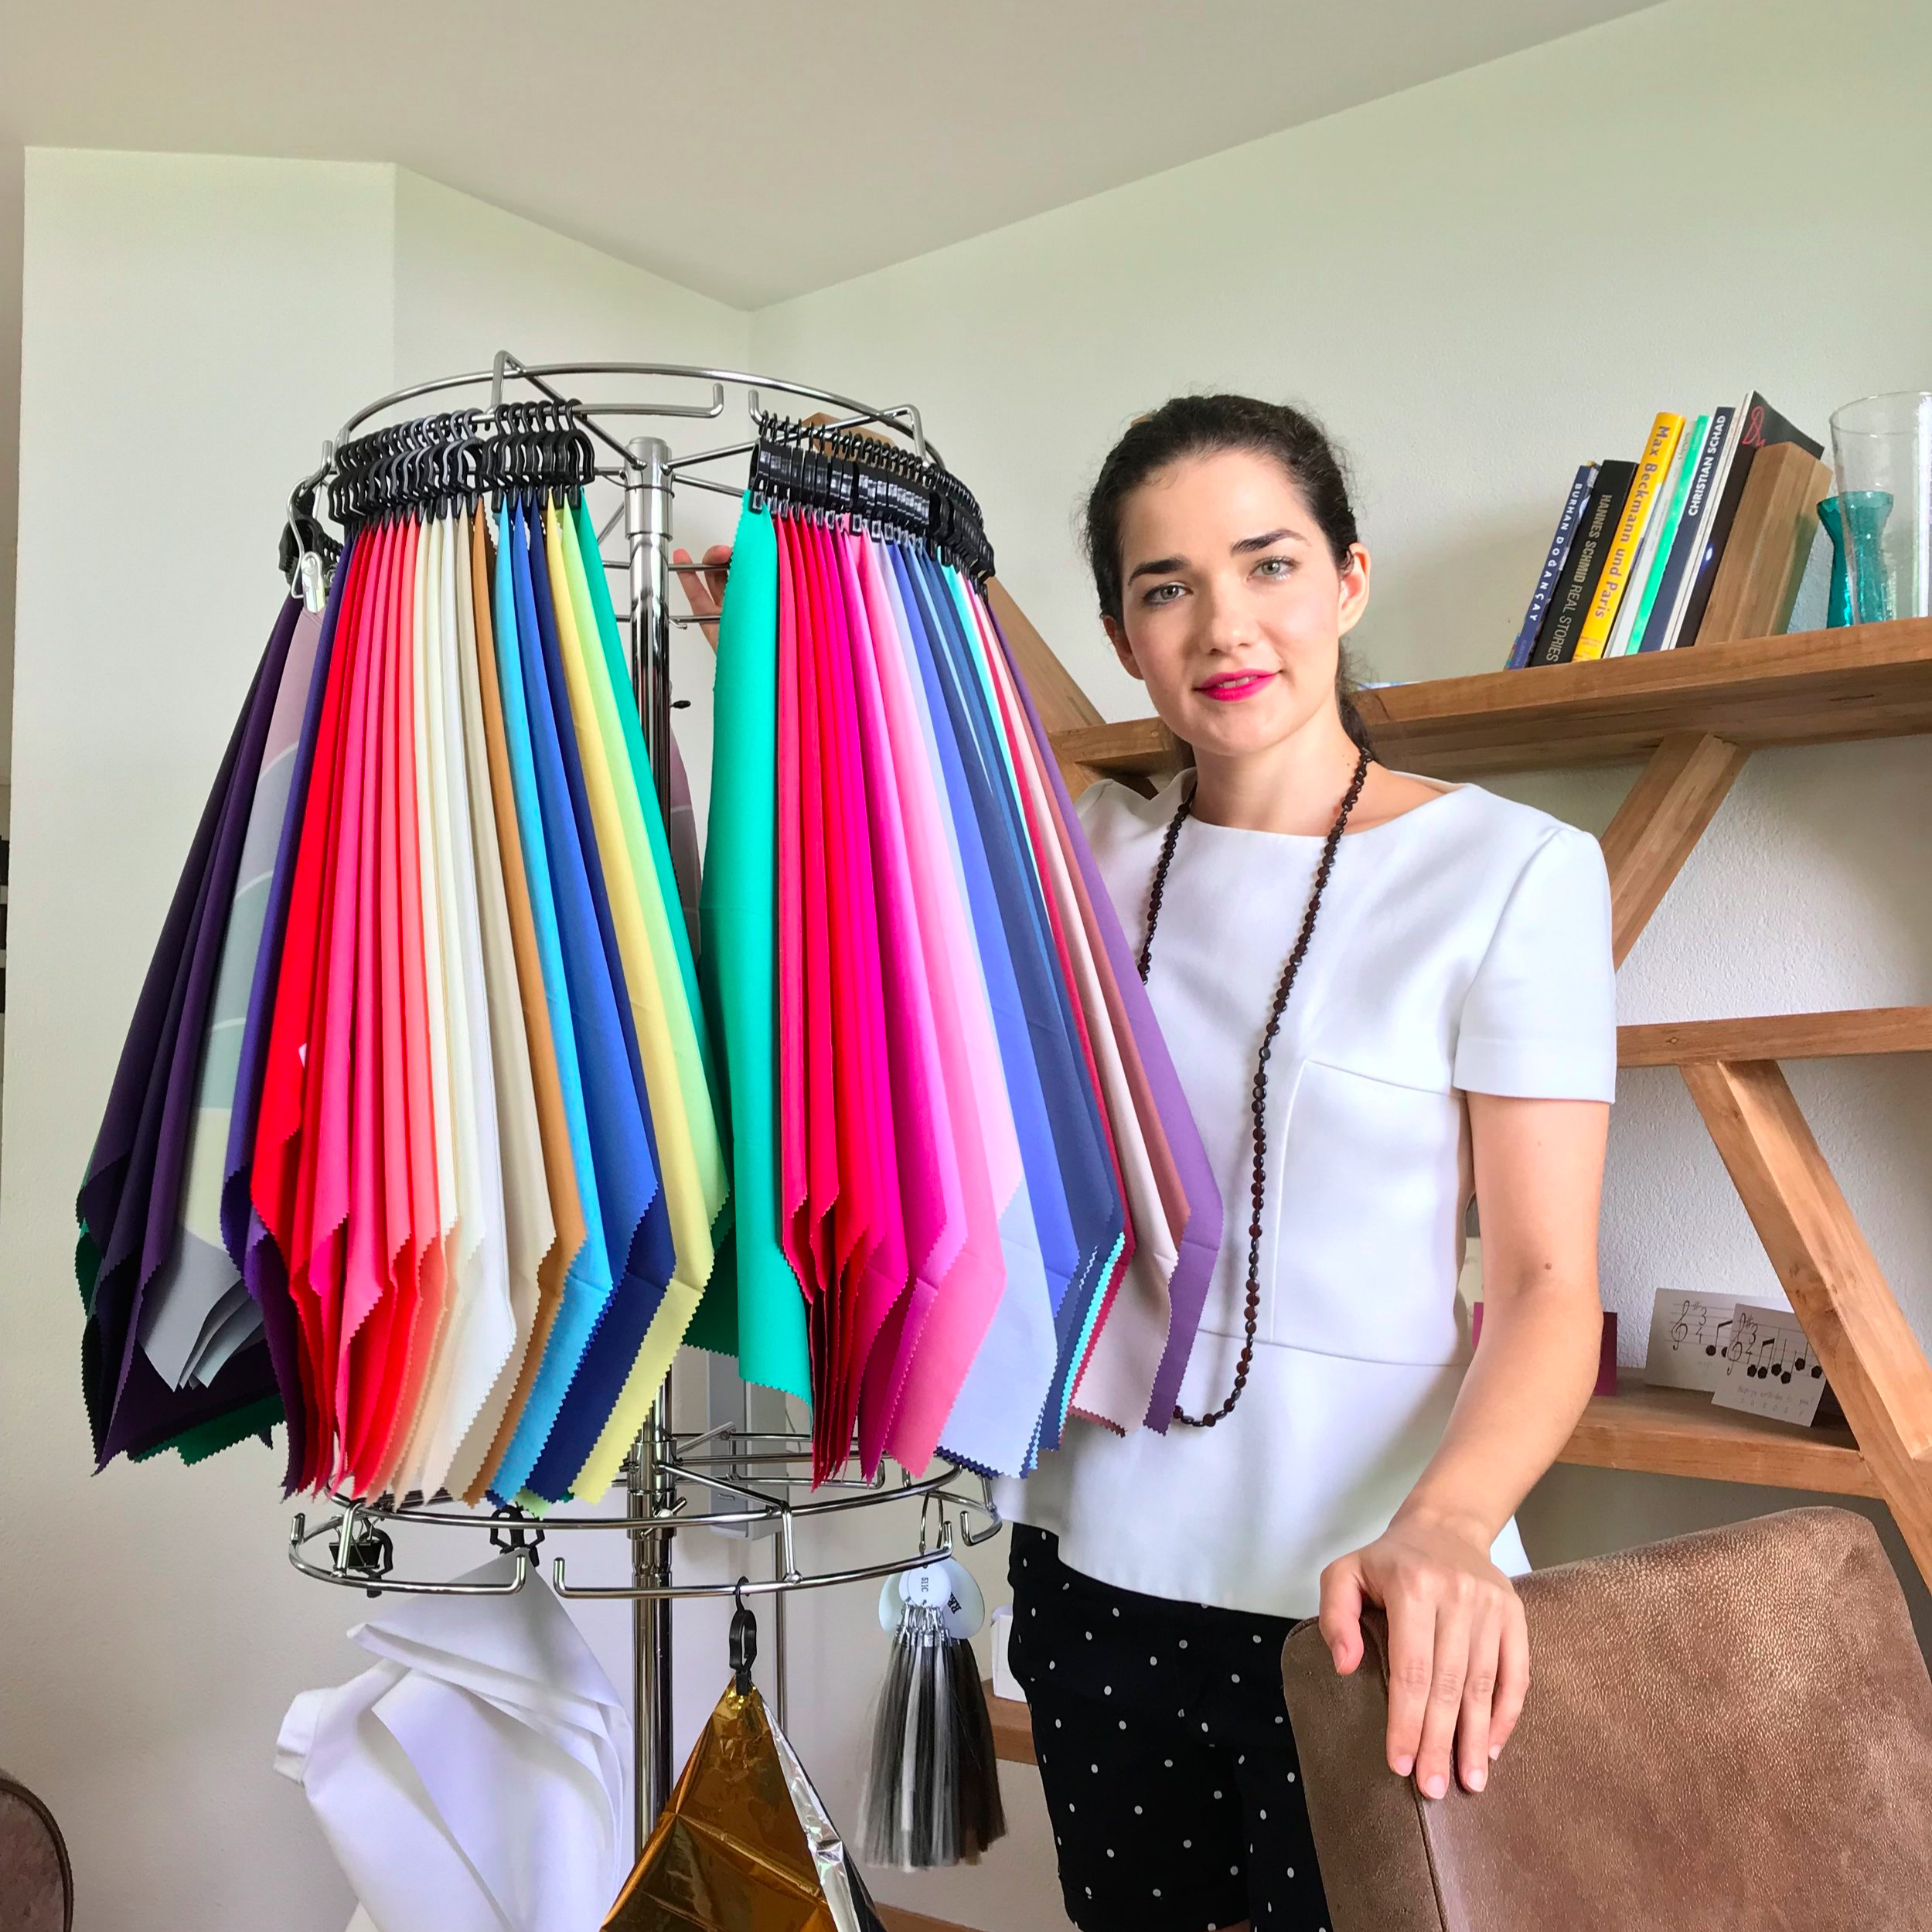 Daniela Ivanovová and her 140 drapes for Personal Colour Analysis